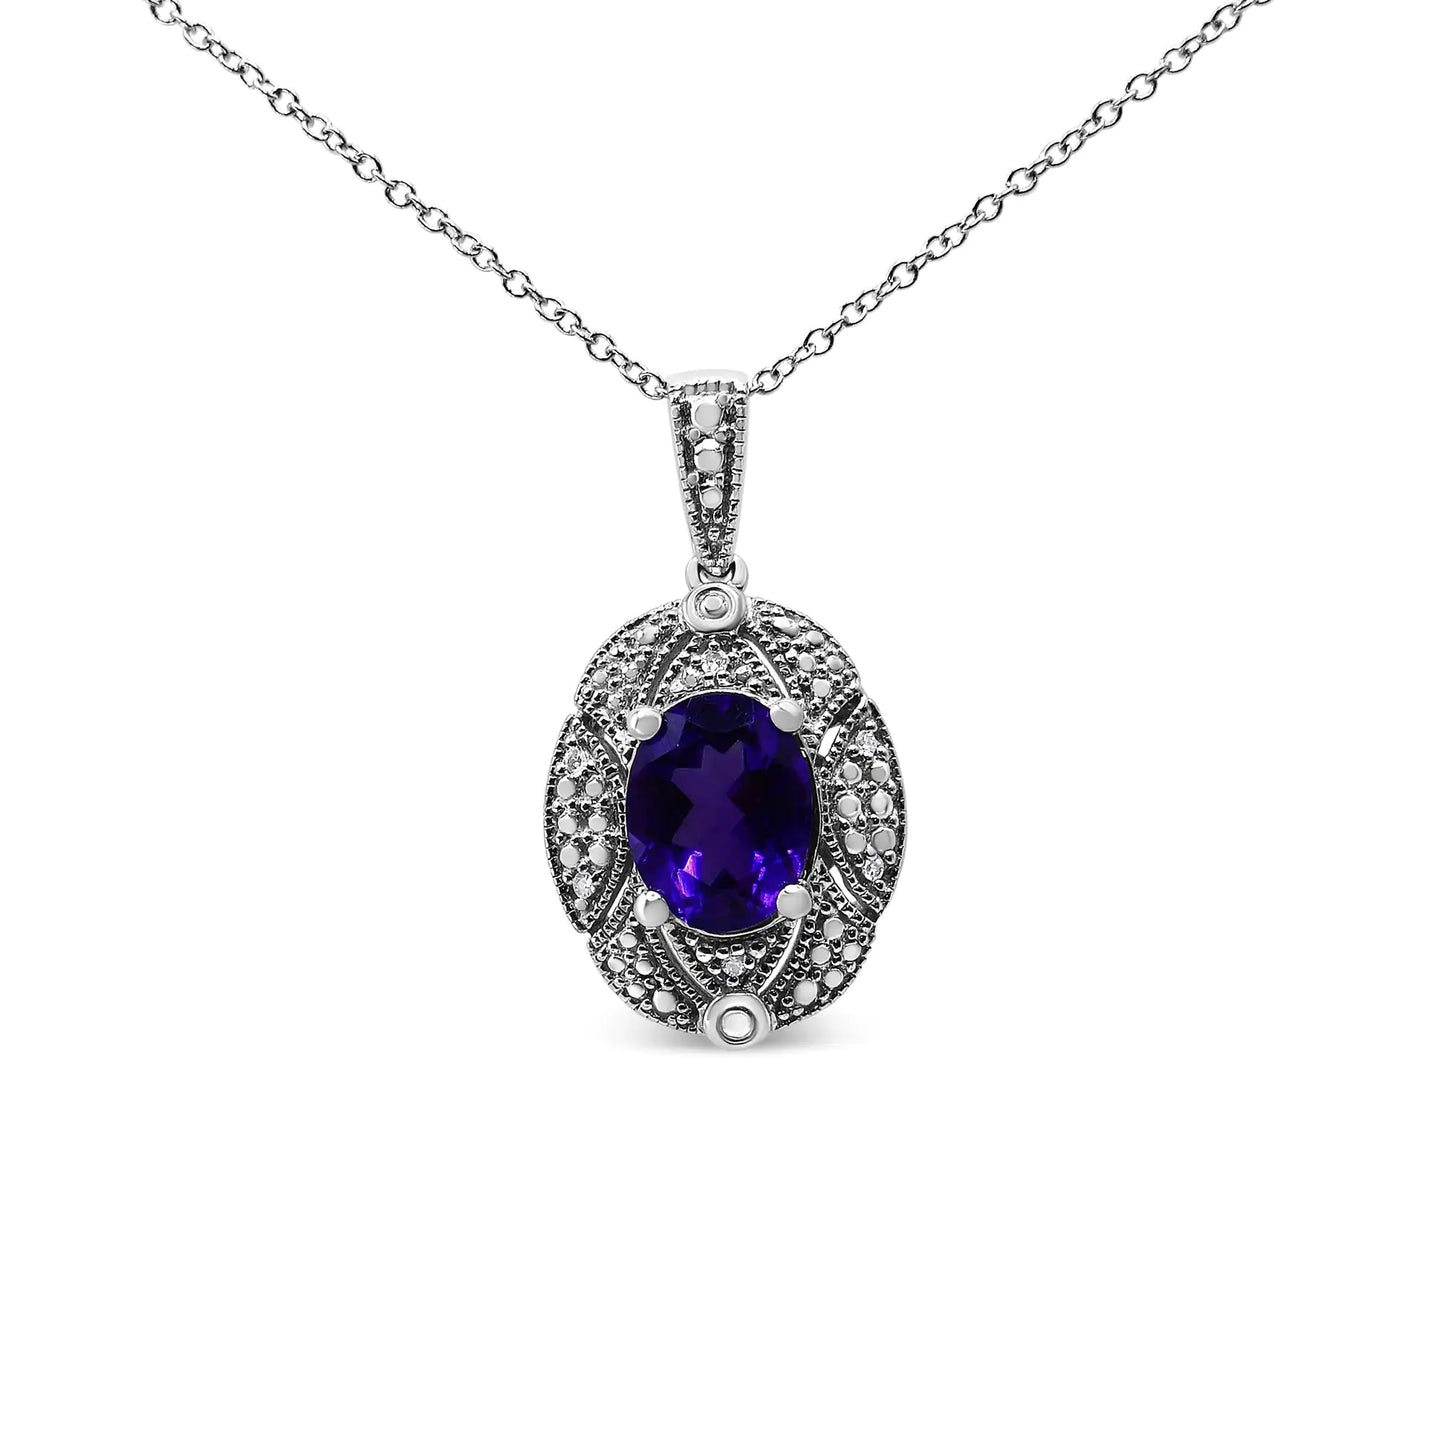 .925 Sterling Silver Diamond Accent and 9x7mm Purple Oval Amethyst Gemstone Pendant 18" Necklace (I-J Color, I1-I2 Clarity)